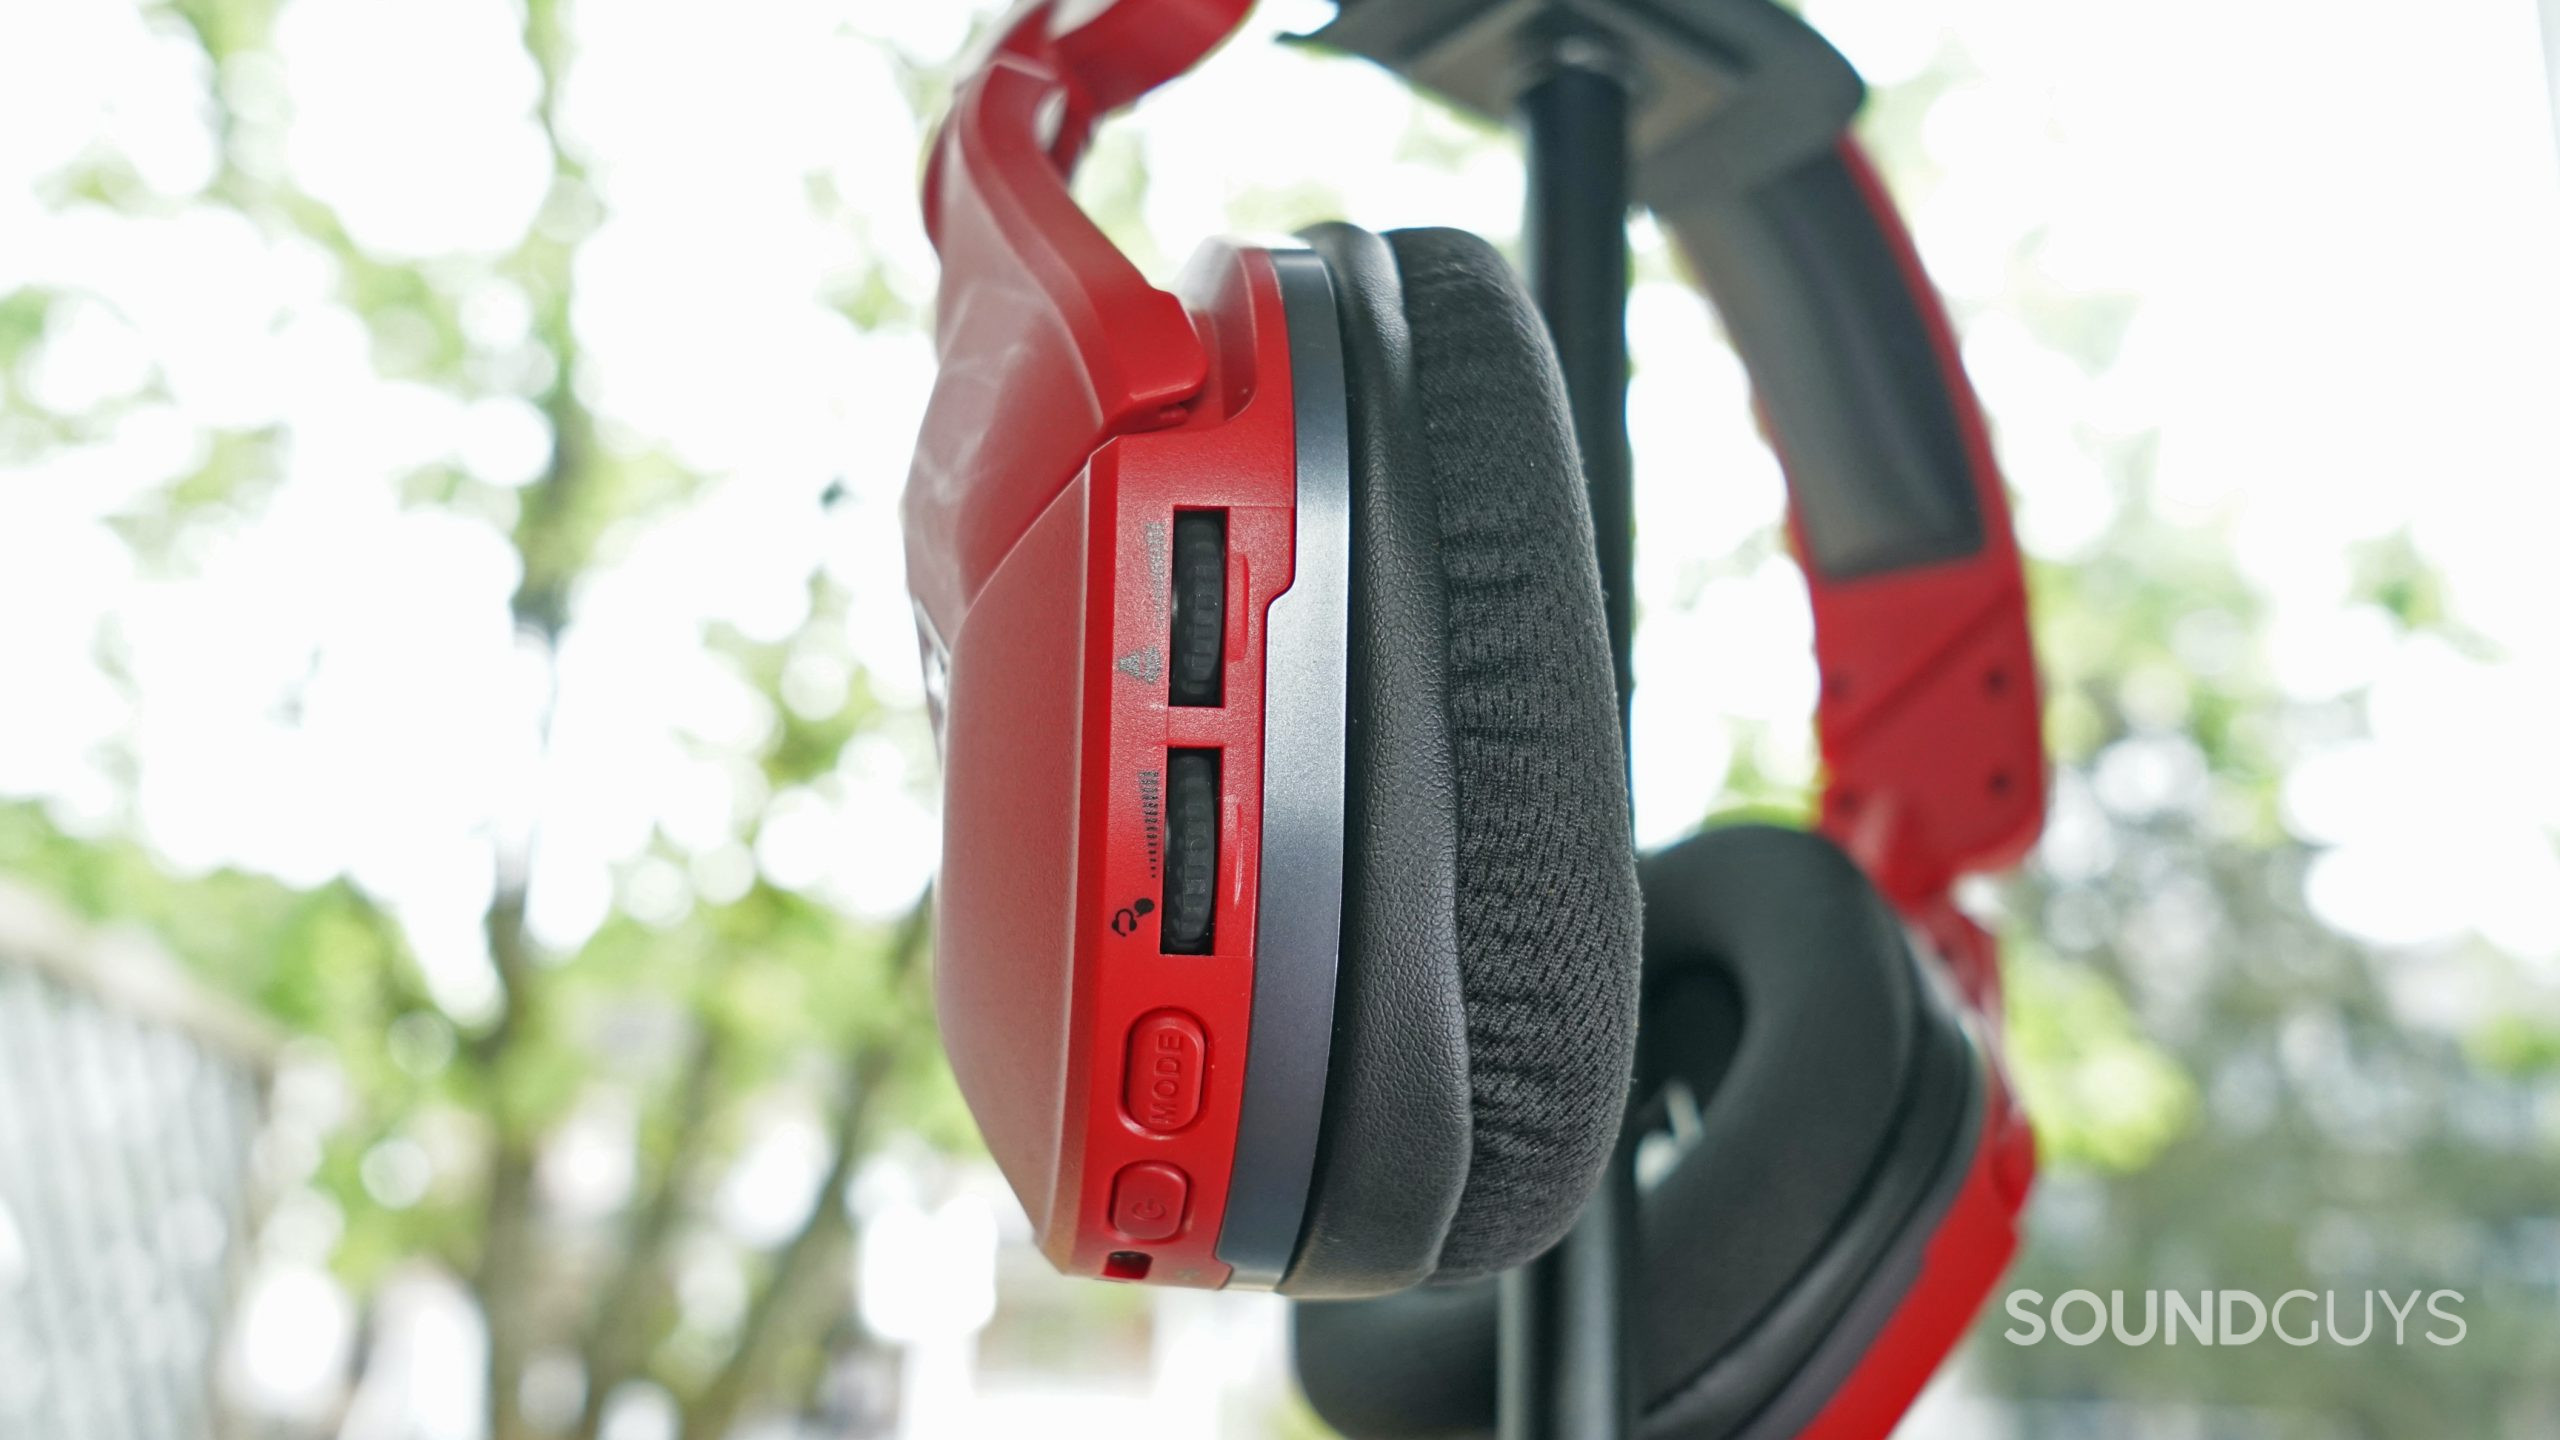 The Turtle Beach Stealth 600 Gen 2 MAX sits on a headphone stand with its on-ear controls in focus.